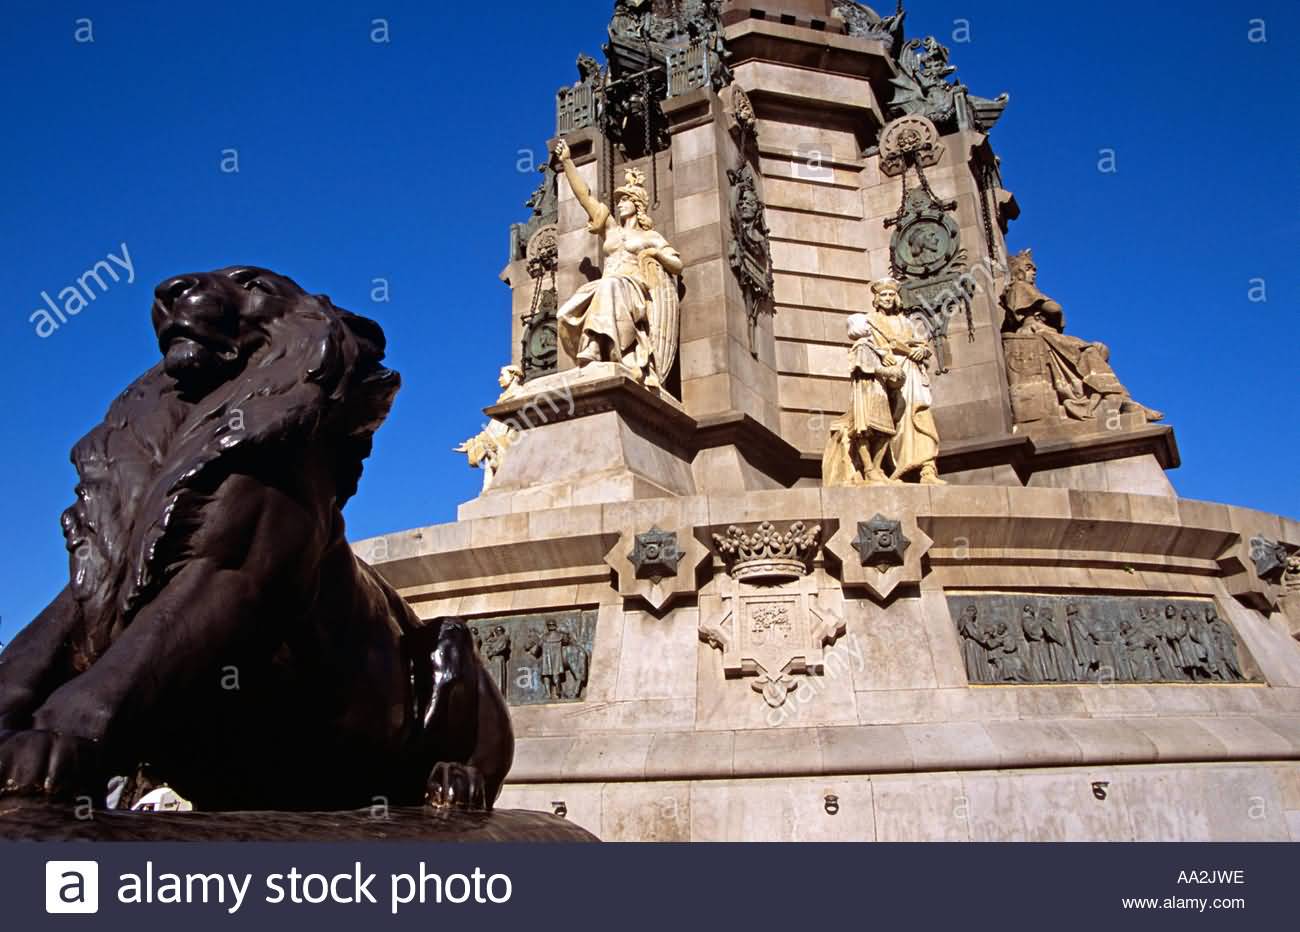 Lion Statue And Base Of The Columbus Monument In Barcelona